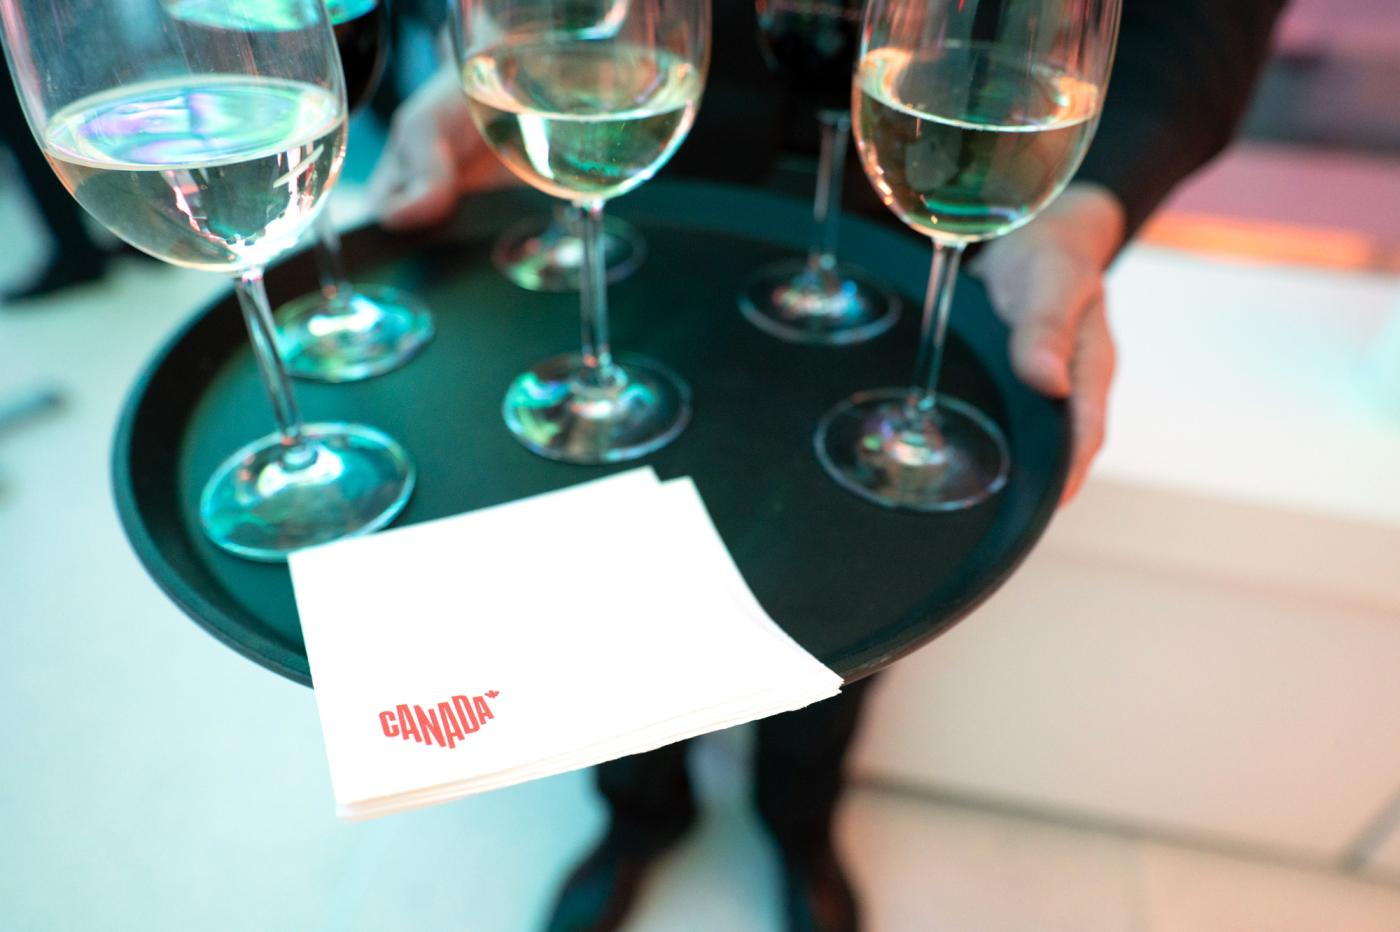 A server holds a drink tray with wine glasses and a square white napkin in the foreground which has a small red Canada logo printed in the corner of it.